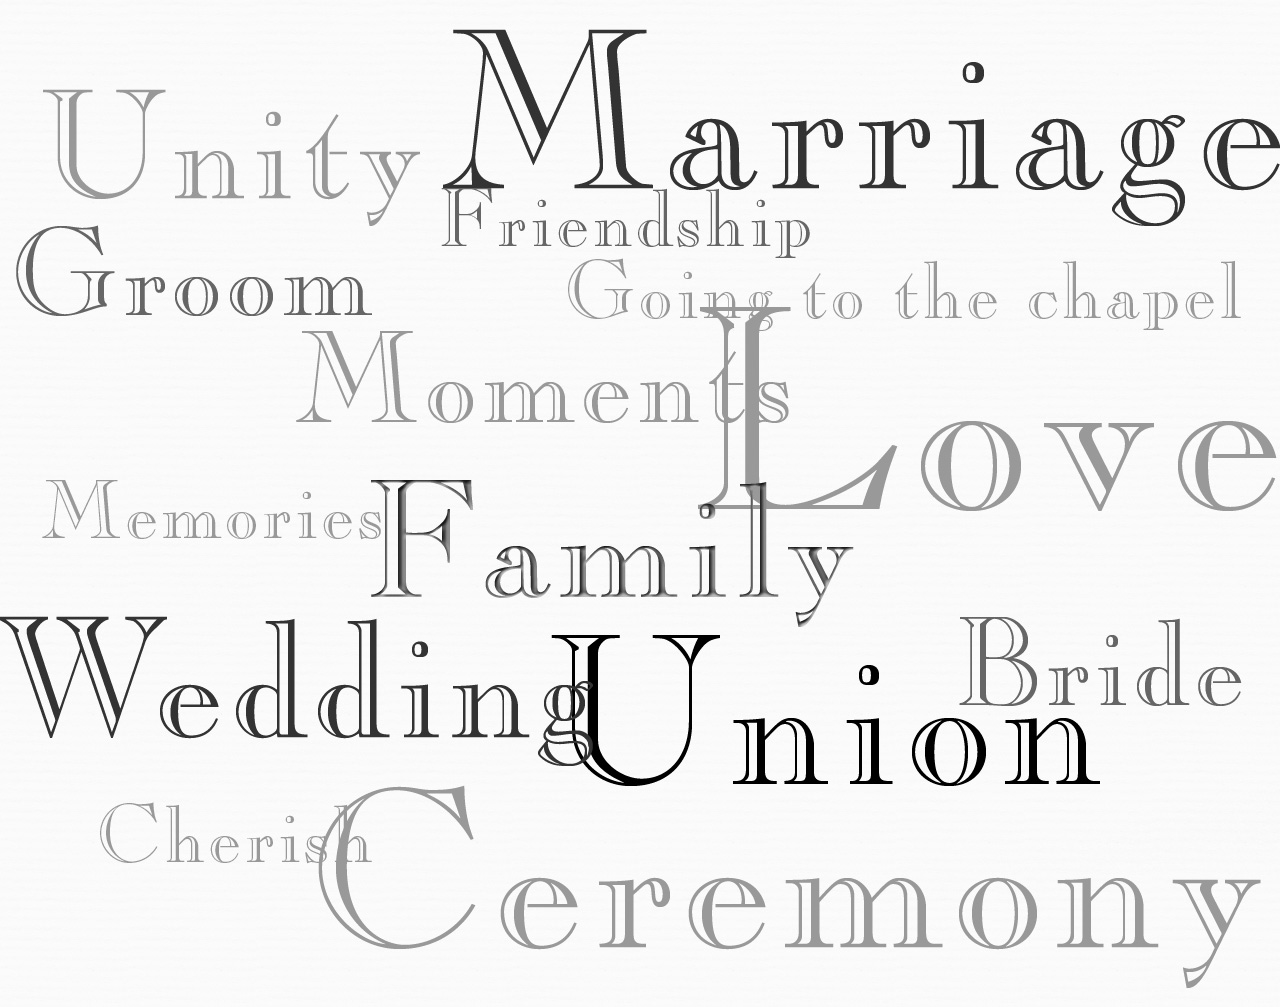 Marriage Union words